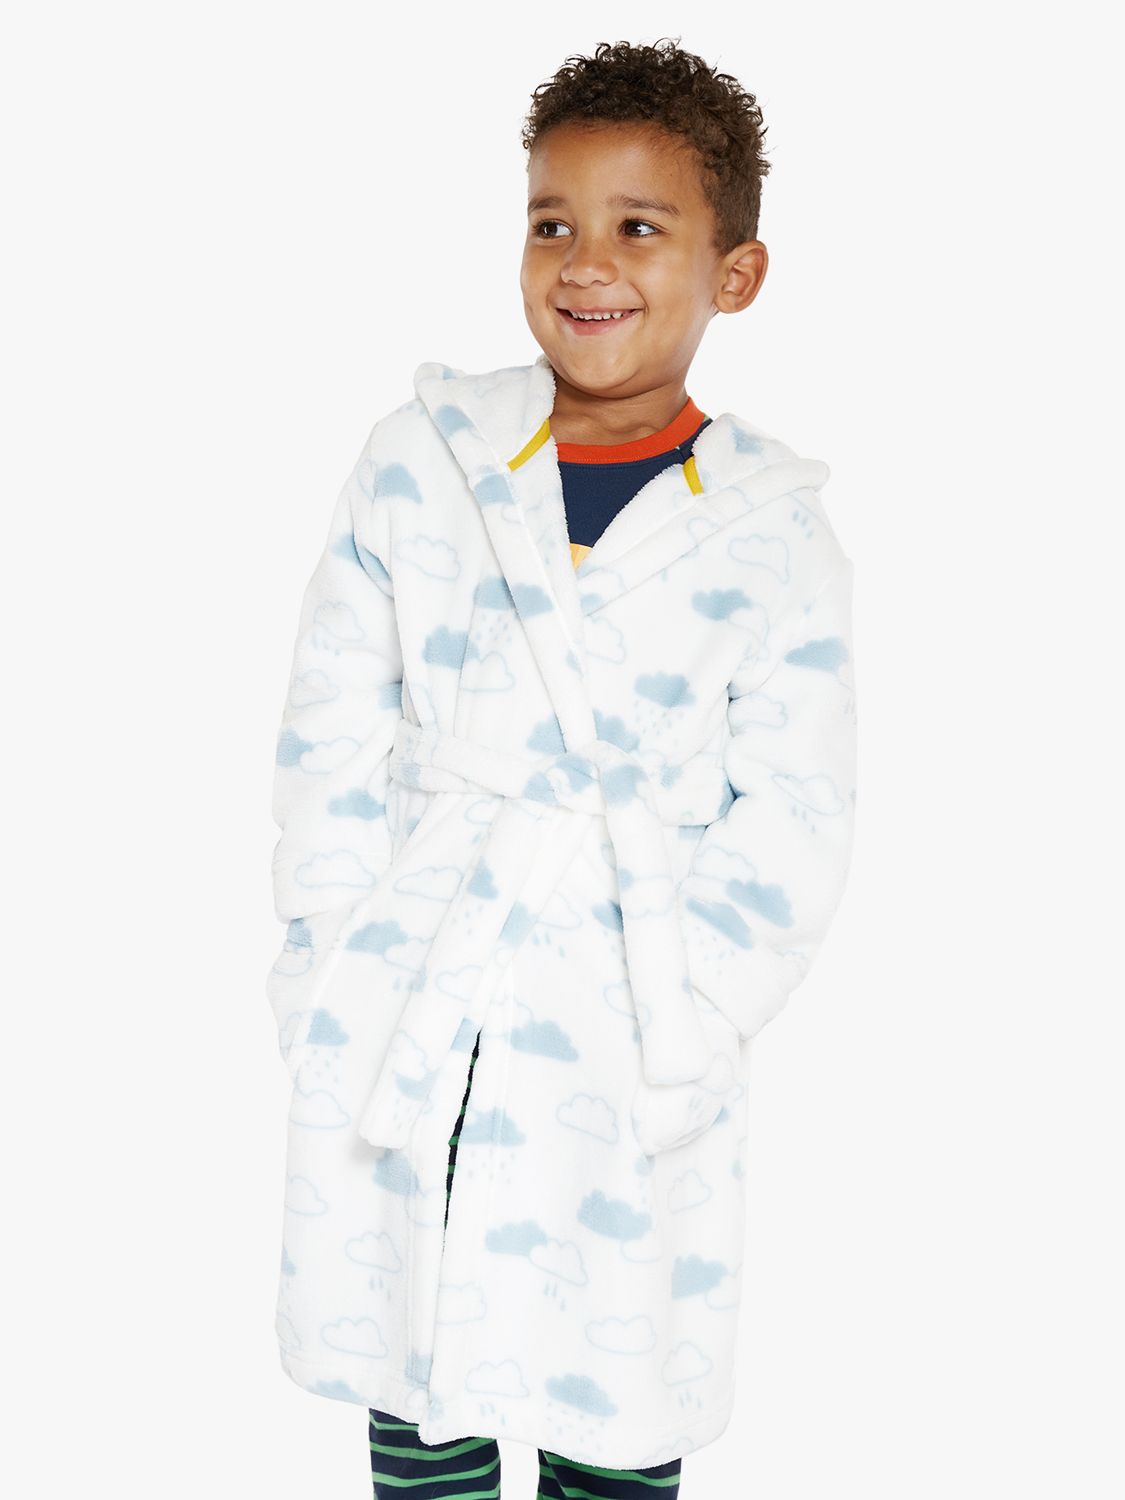 Frugi Kids' Brilliant Clouds Hooded Robe, White/Blue, 5-6 years